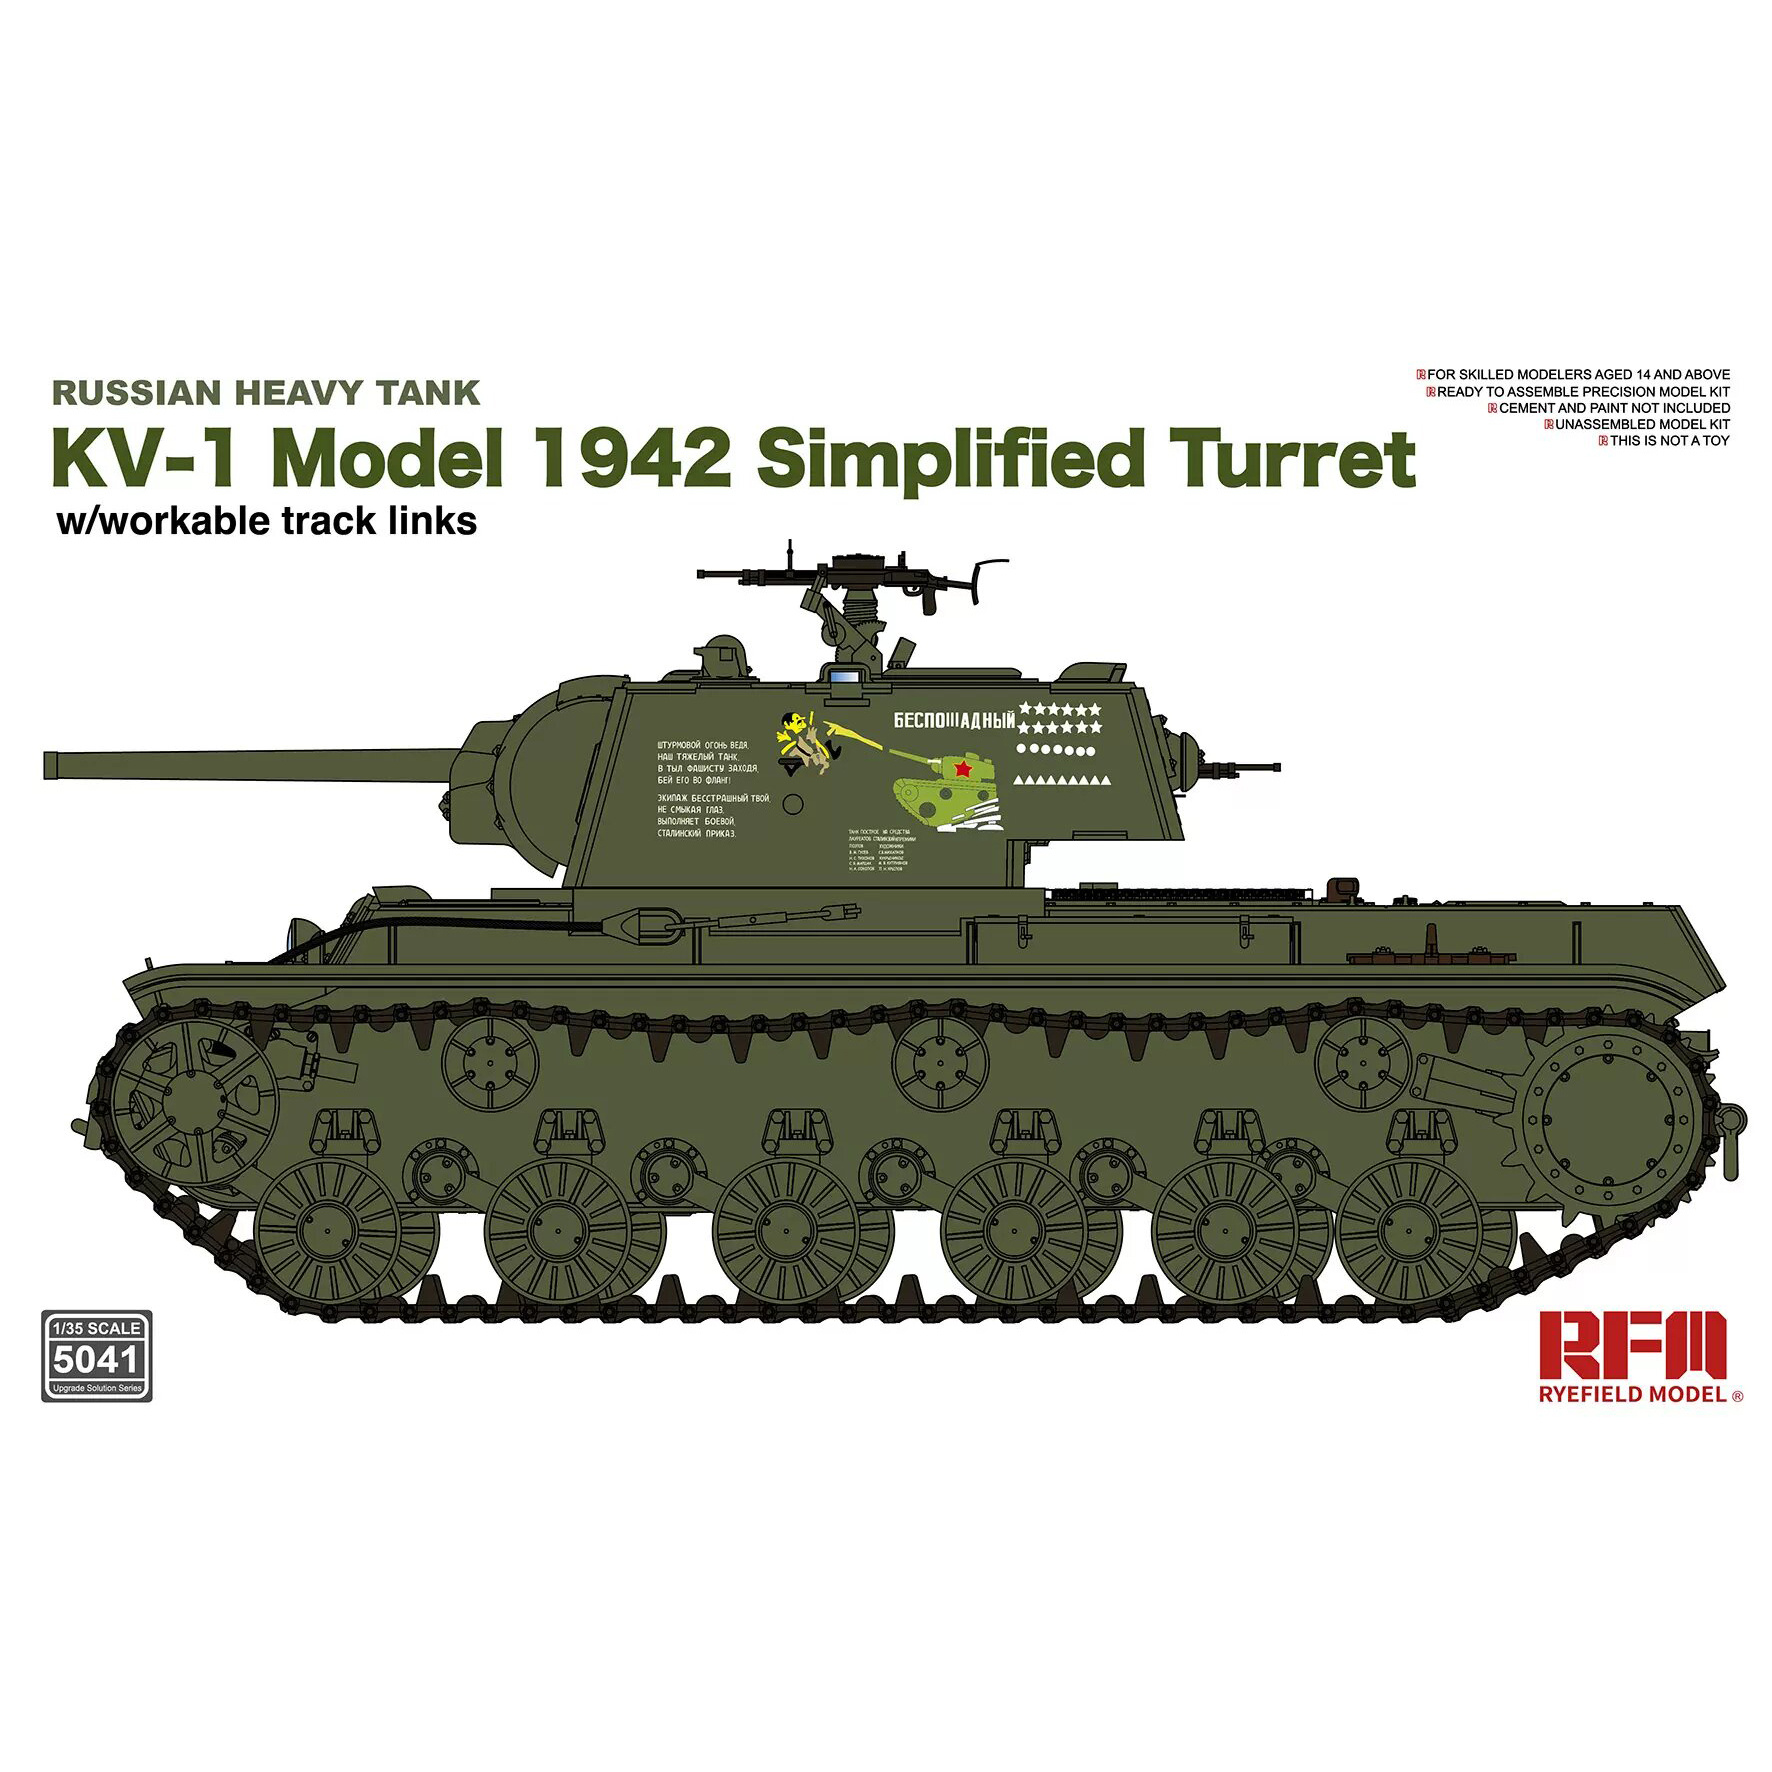 RM-5041 Rye Field Model 1/35 Soviet KV-1 tank with a simplified turret, issue 1942